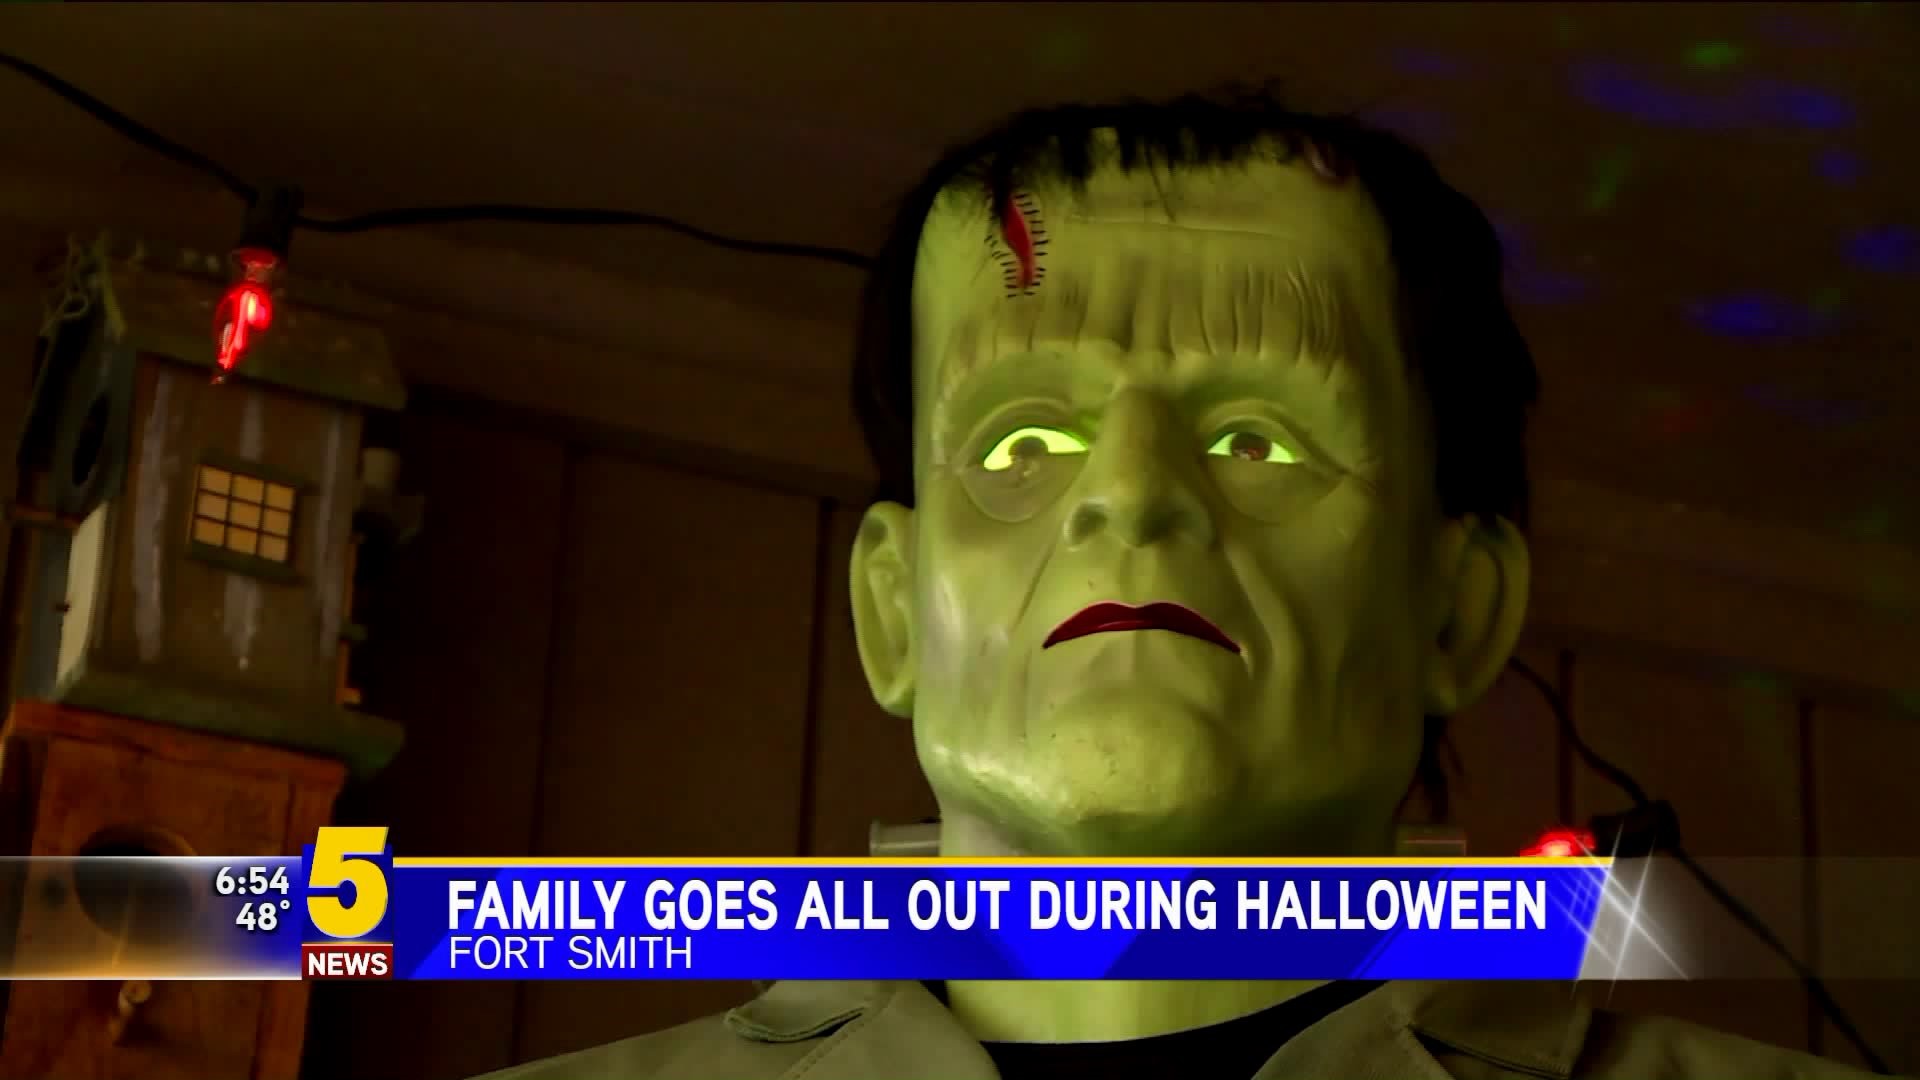 Family Goes All Out During Halloween